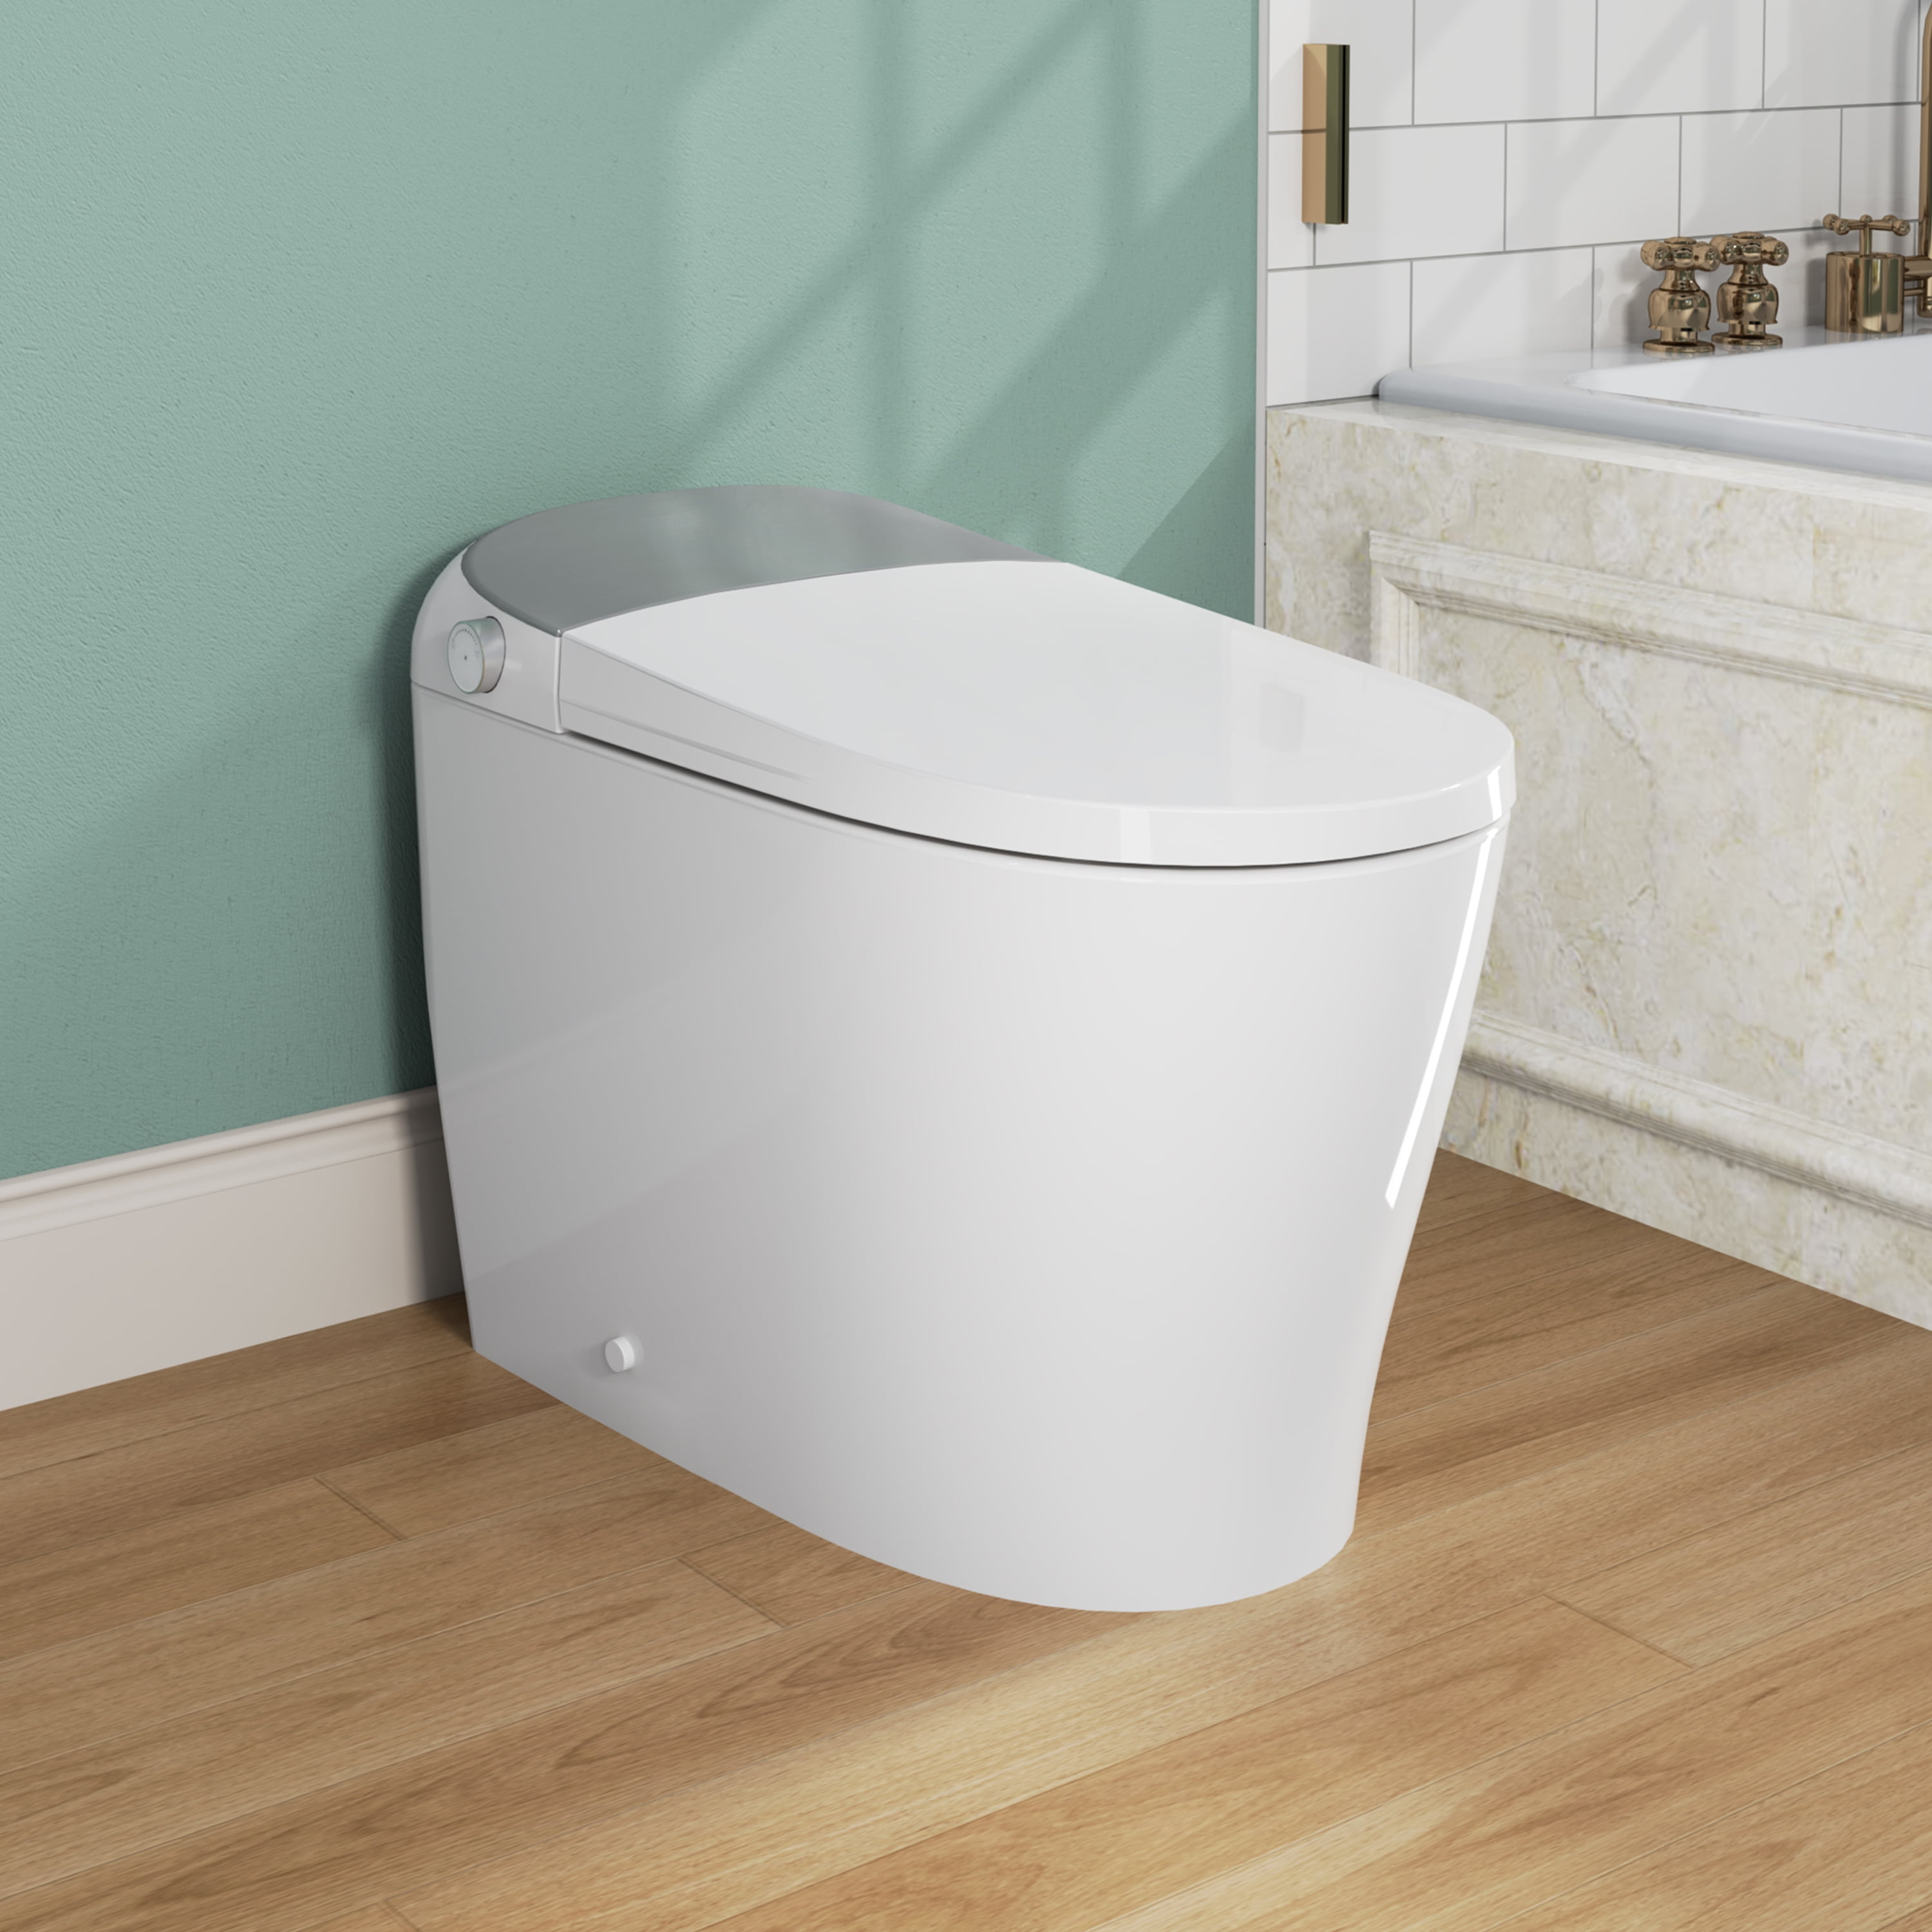 Smart Toilet with Automatic Flush and Heated Toilet Seat, One